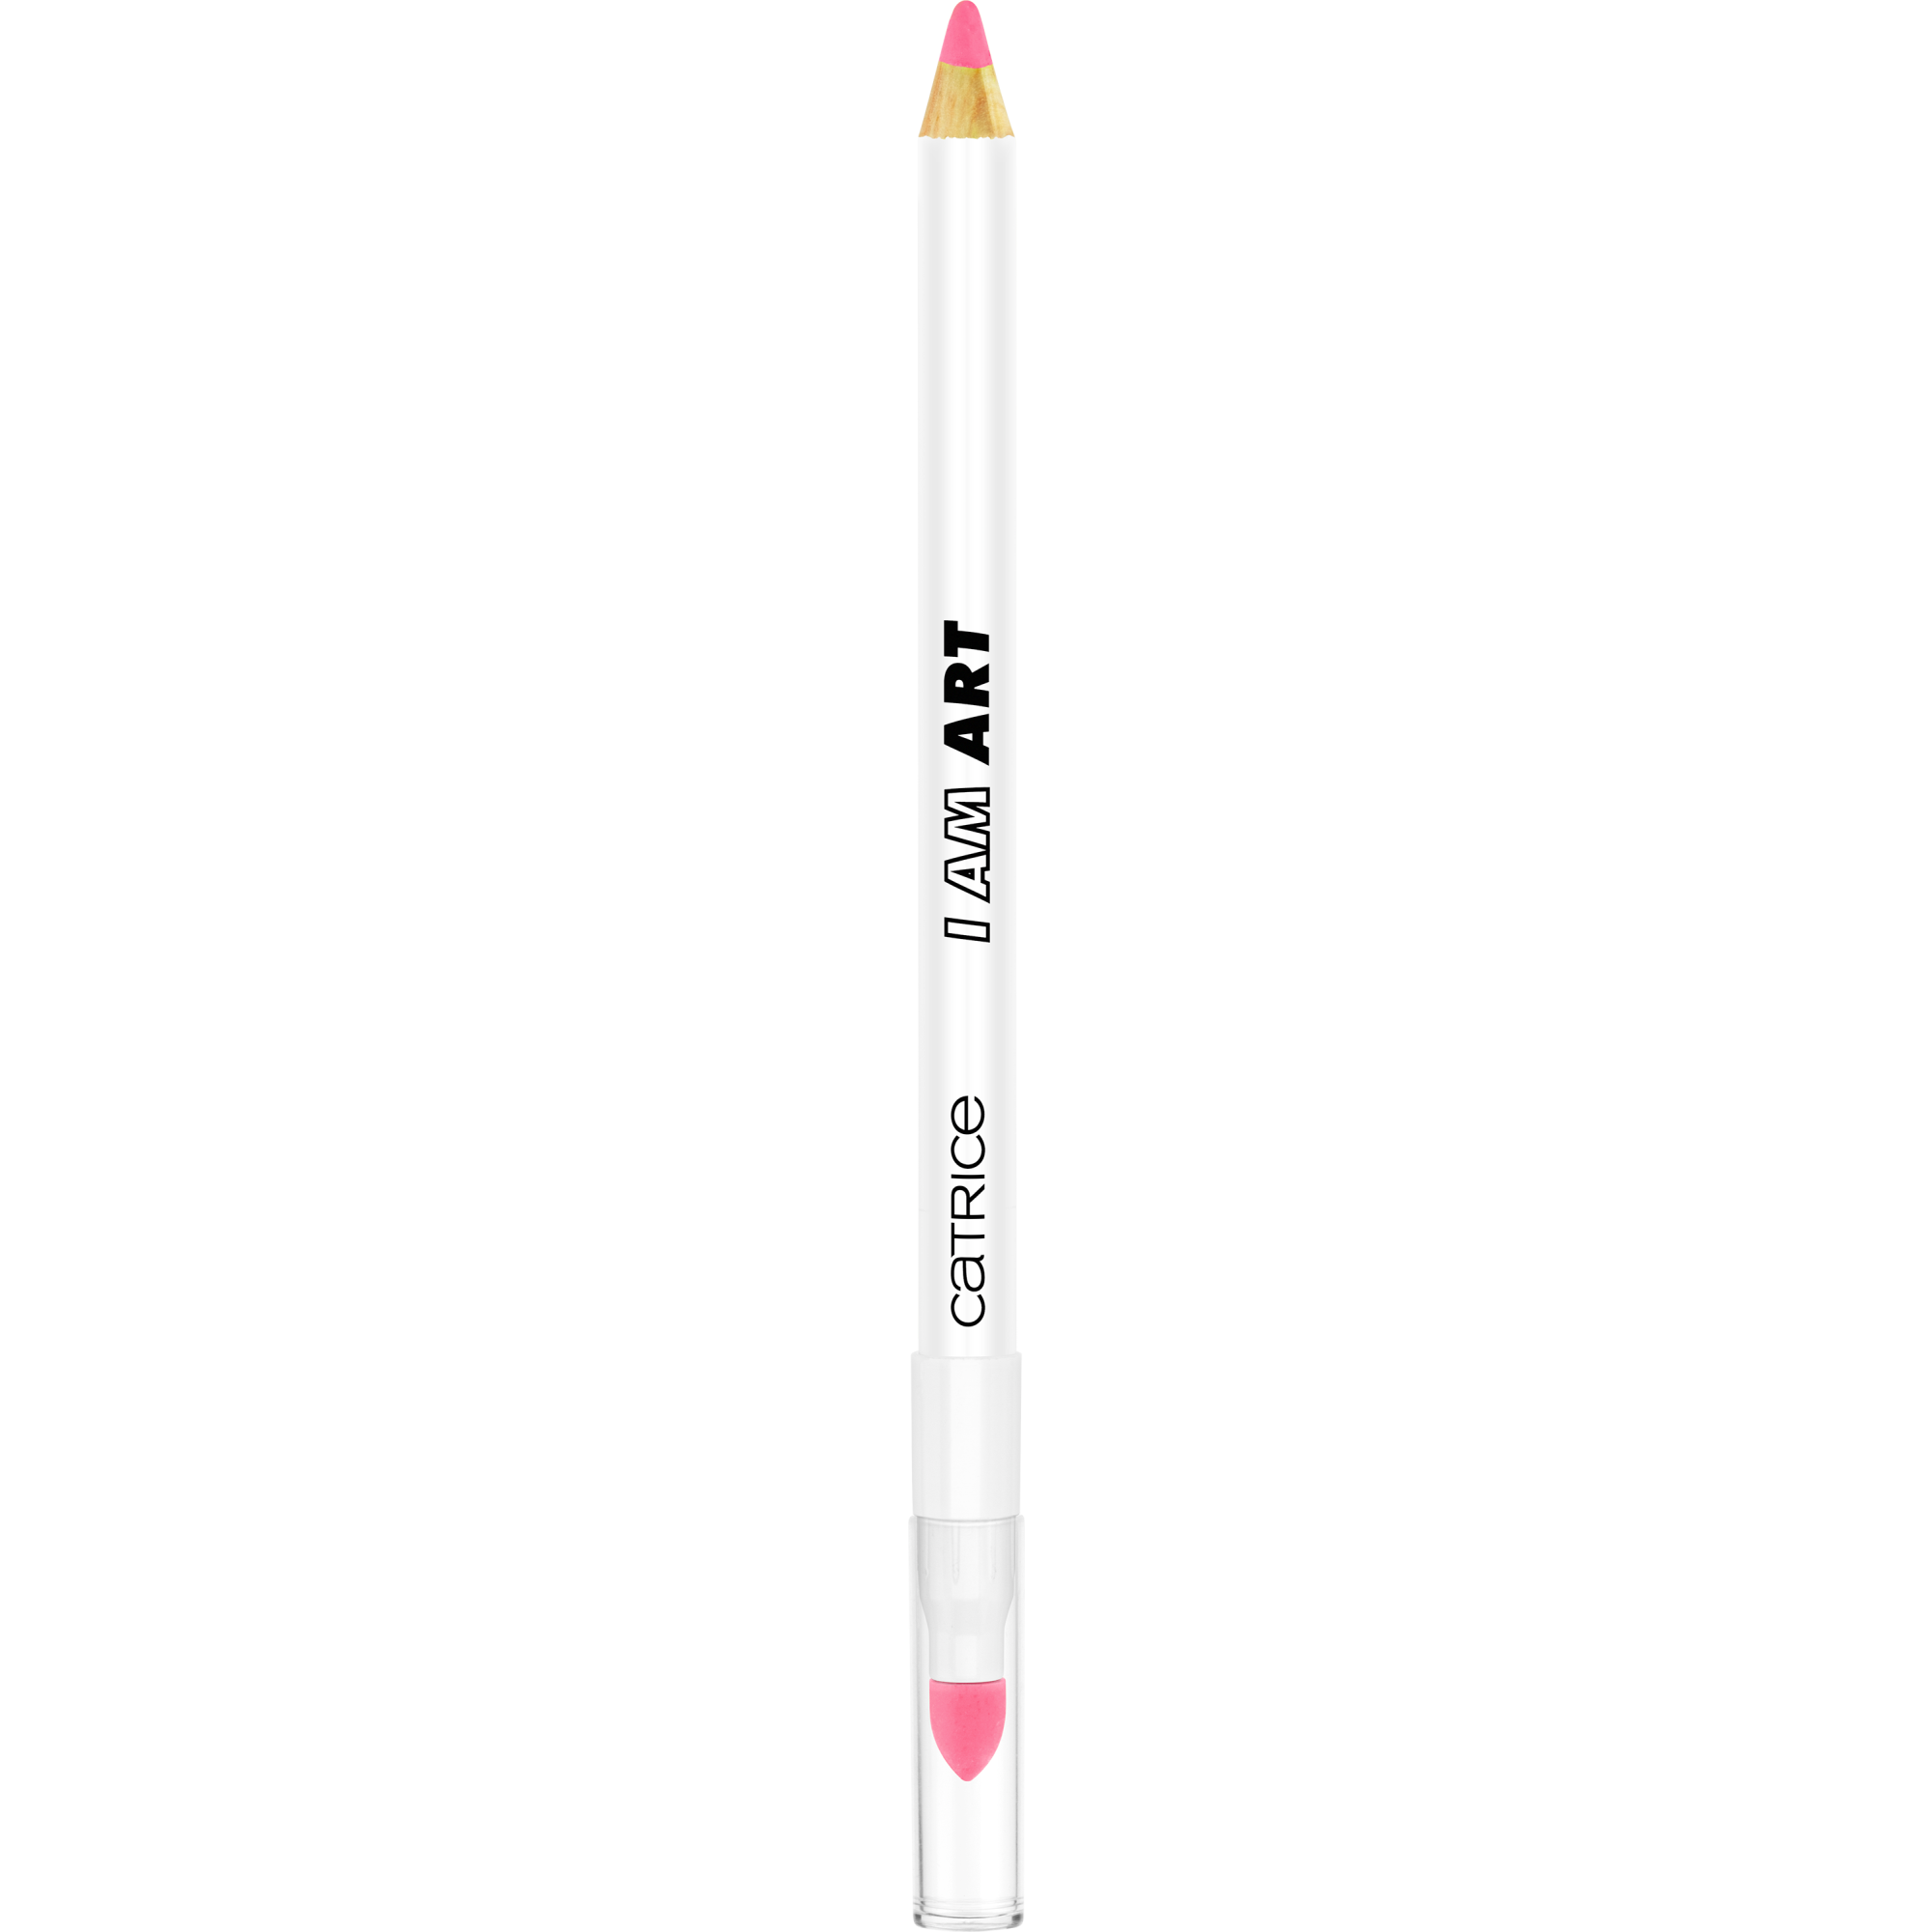 WHO I AM Double Ended Eye Pencil